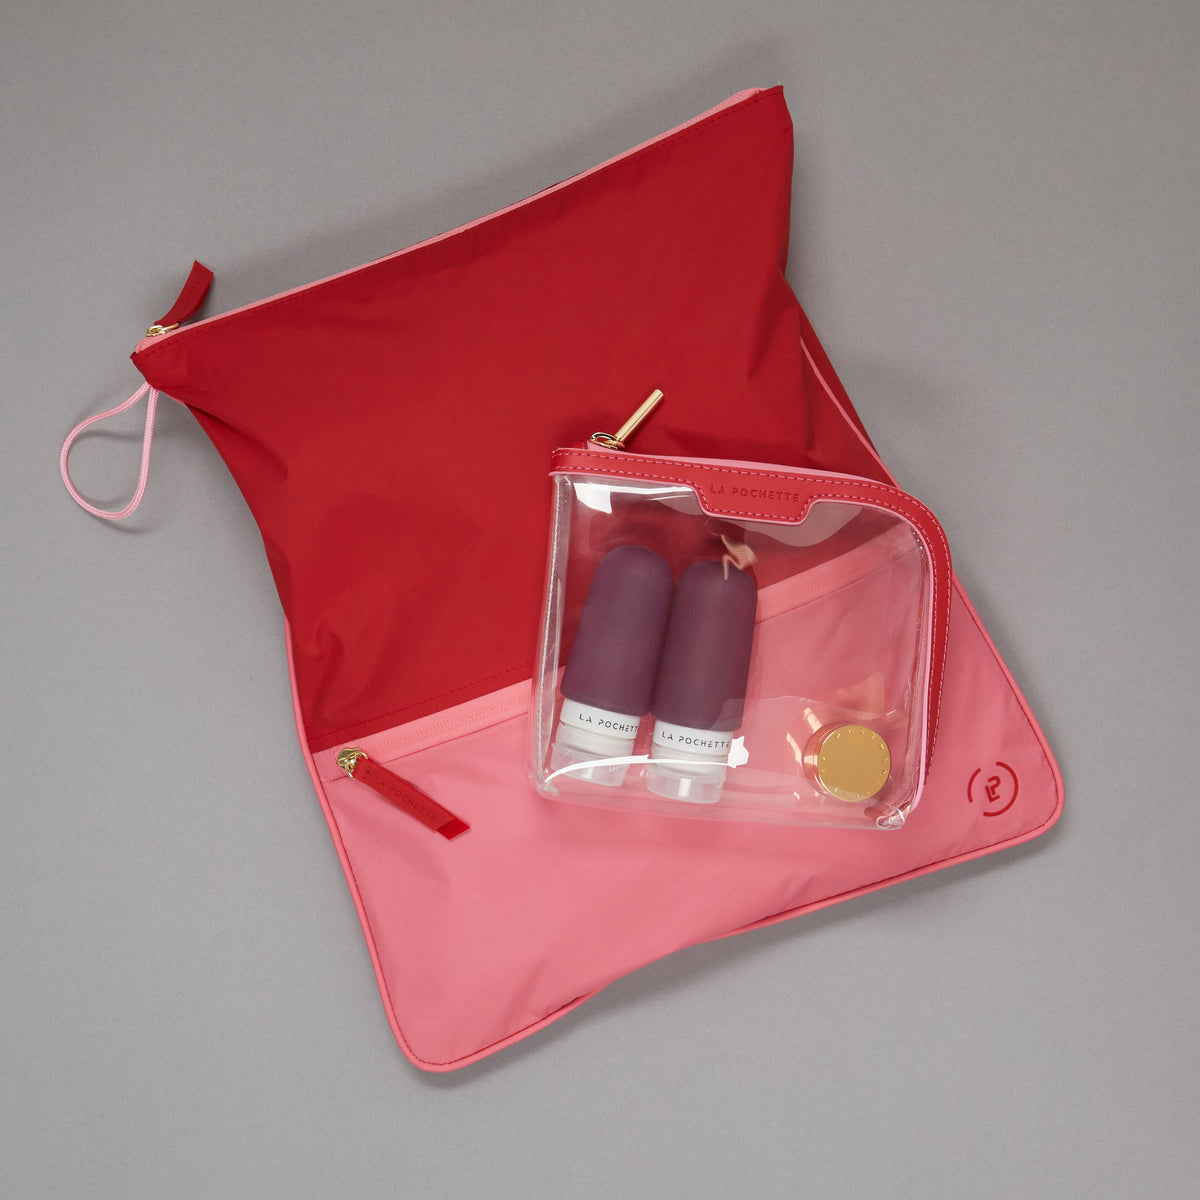 Small Anywhere Everywhere Pouch in Chilli Peony colurway containing La Pochette silicone travel bottles, resting on Sweat Bag in Chilli Peony colour way